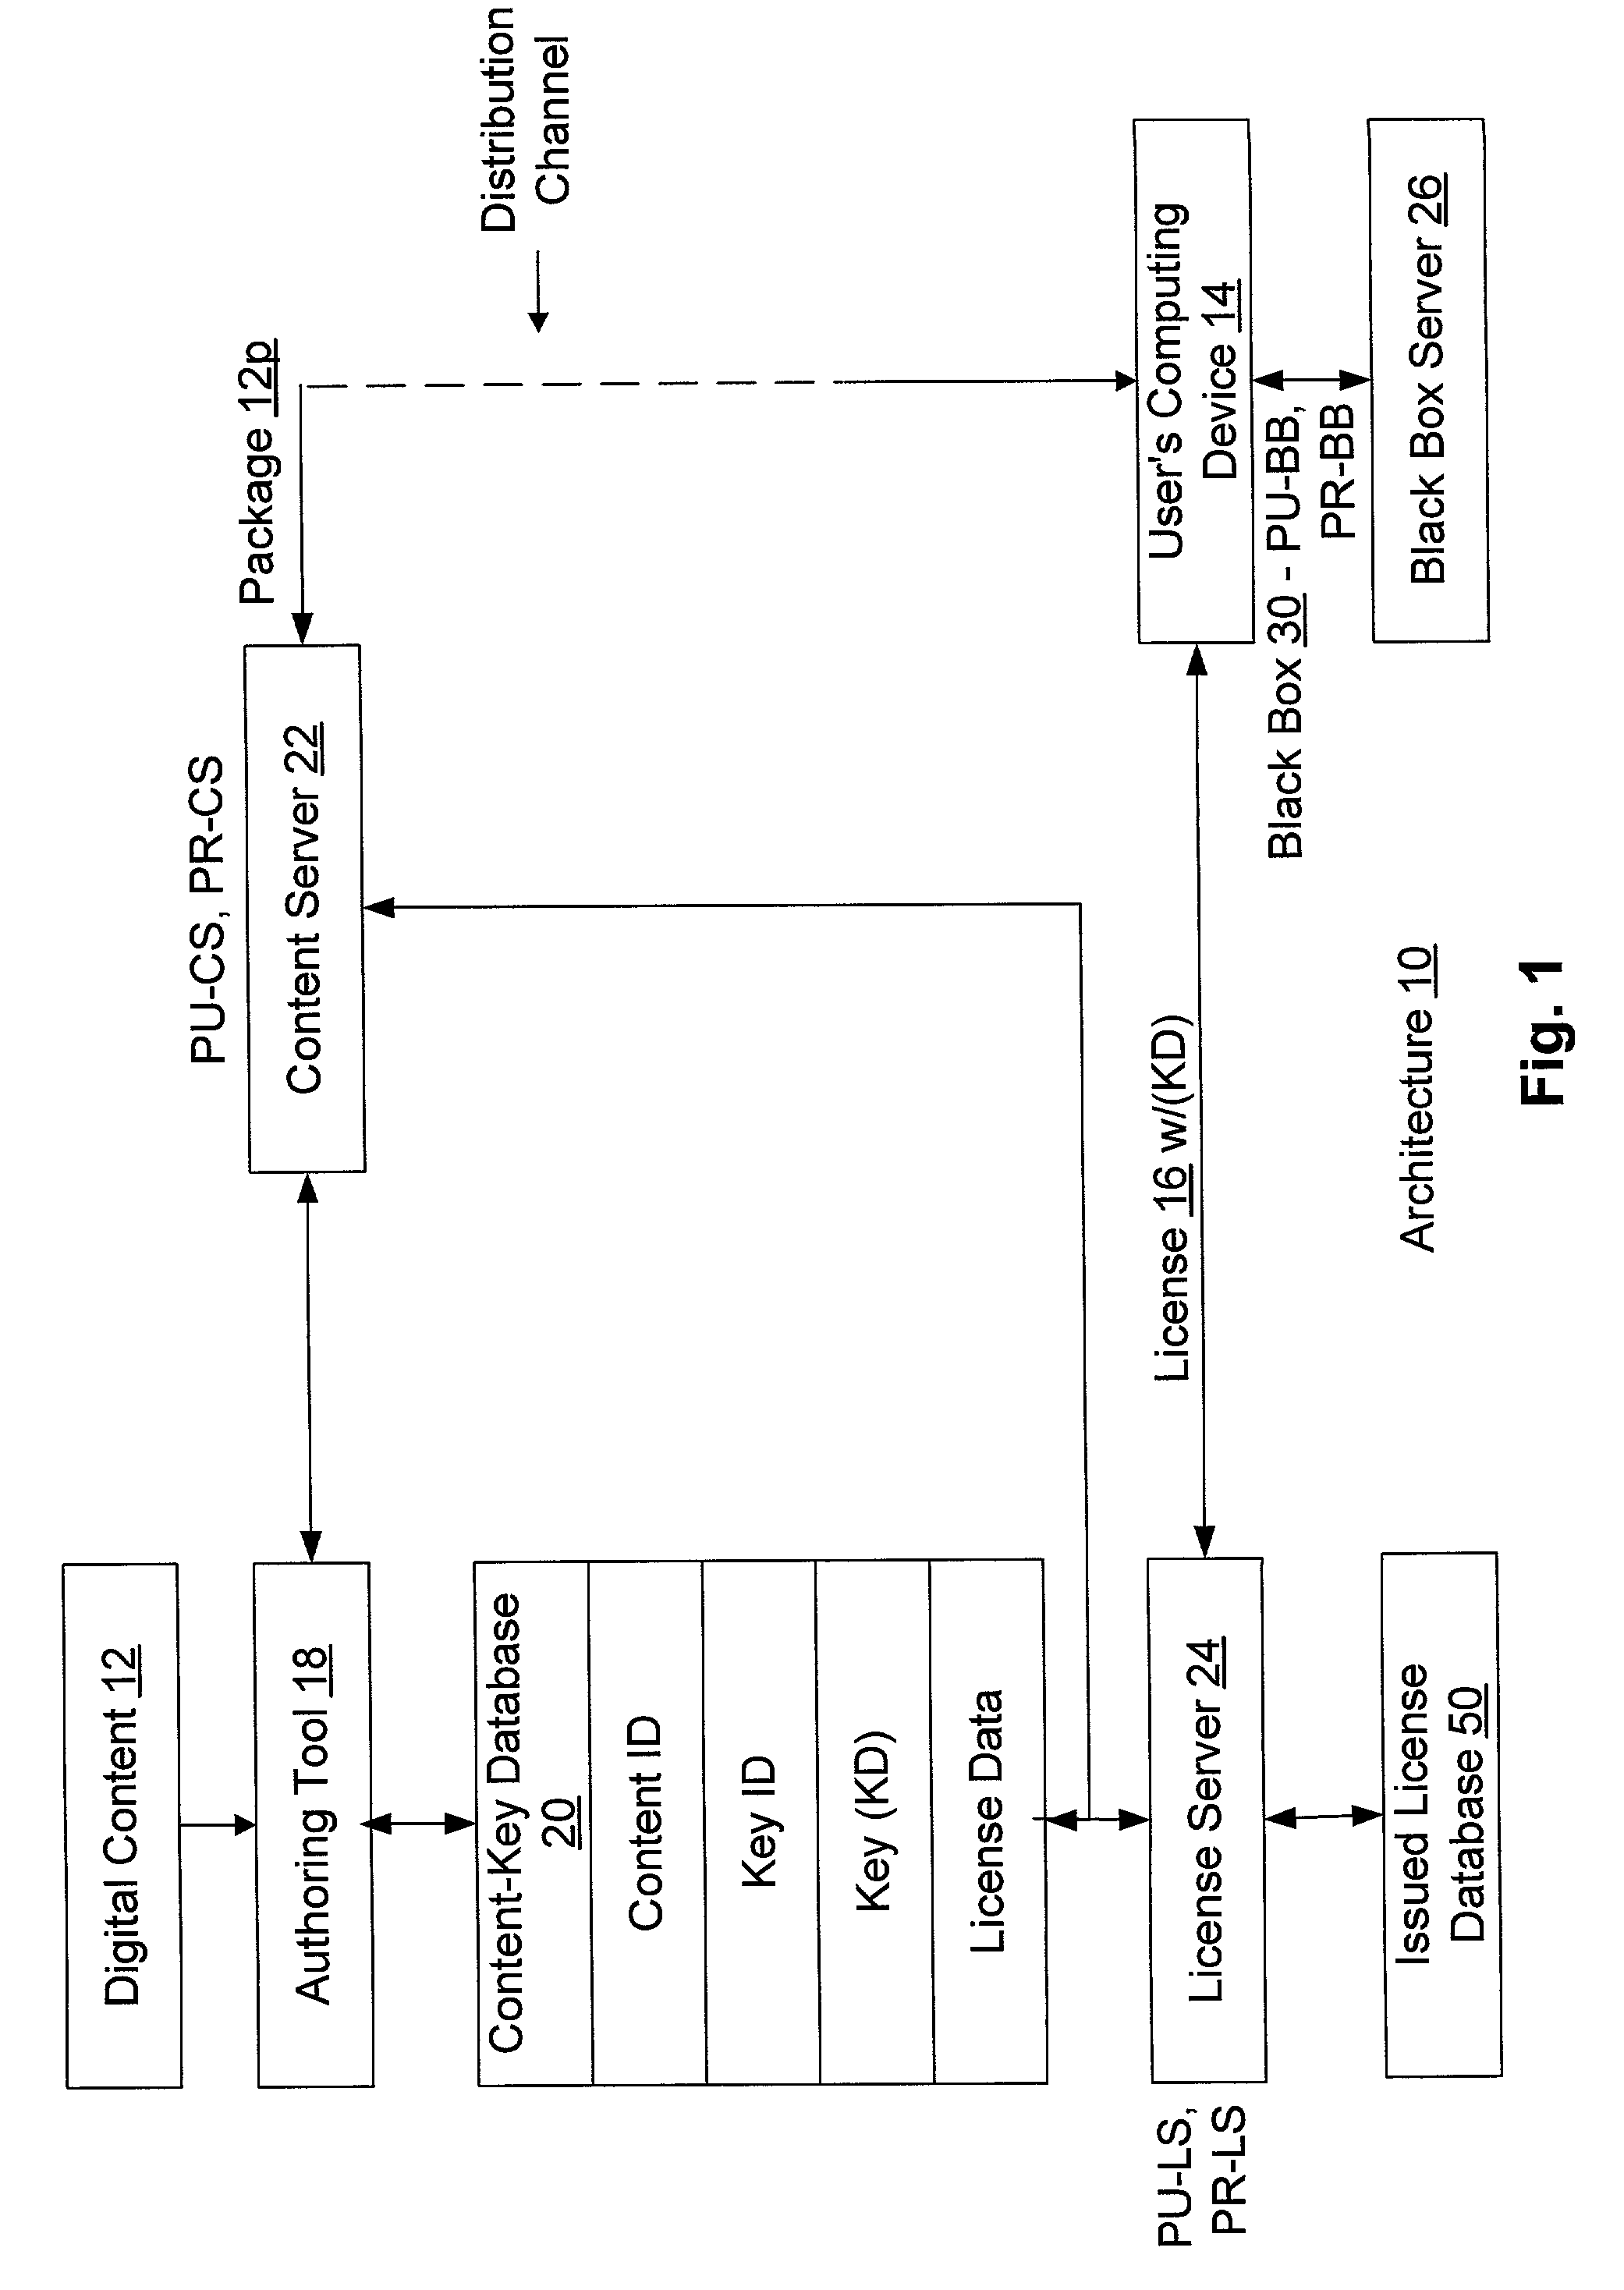 Supervised license acquisition in a digital rights management system on a computing device